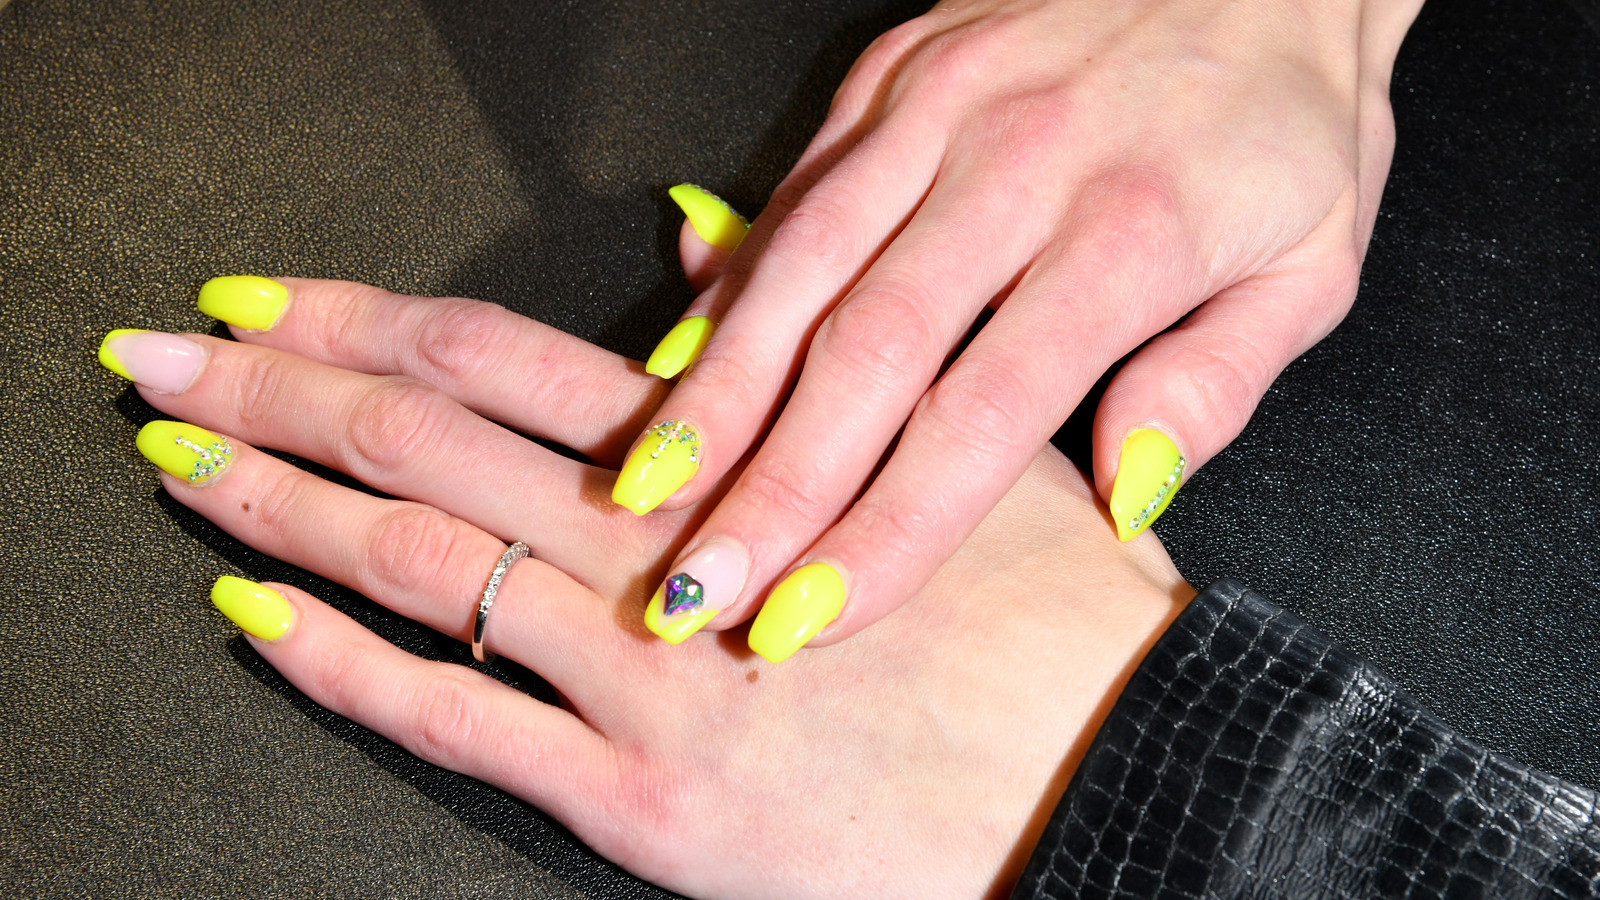 Shoppers Say Yellow Nails Are Stopped In Their Tracks With This Treatment